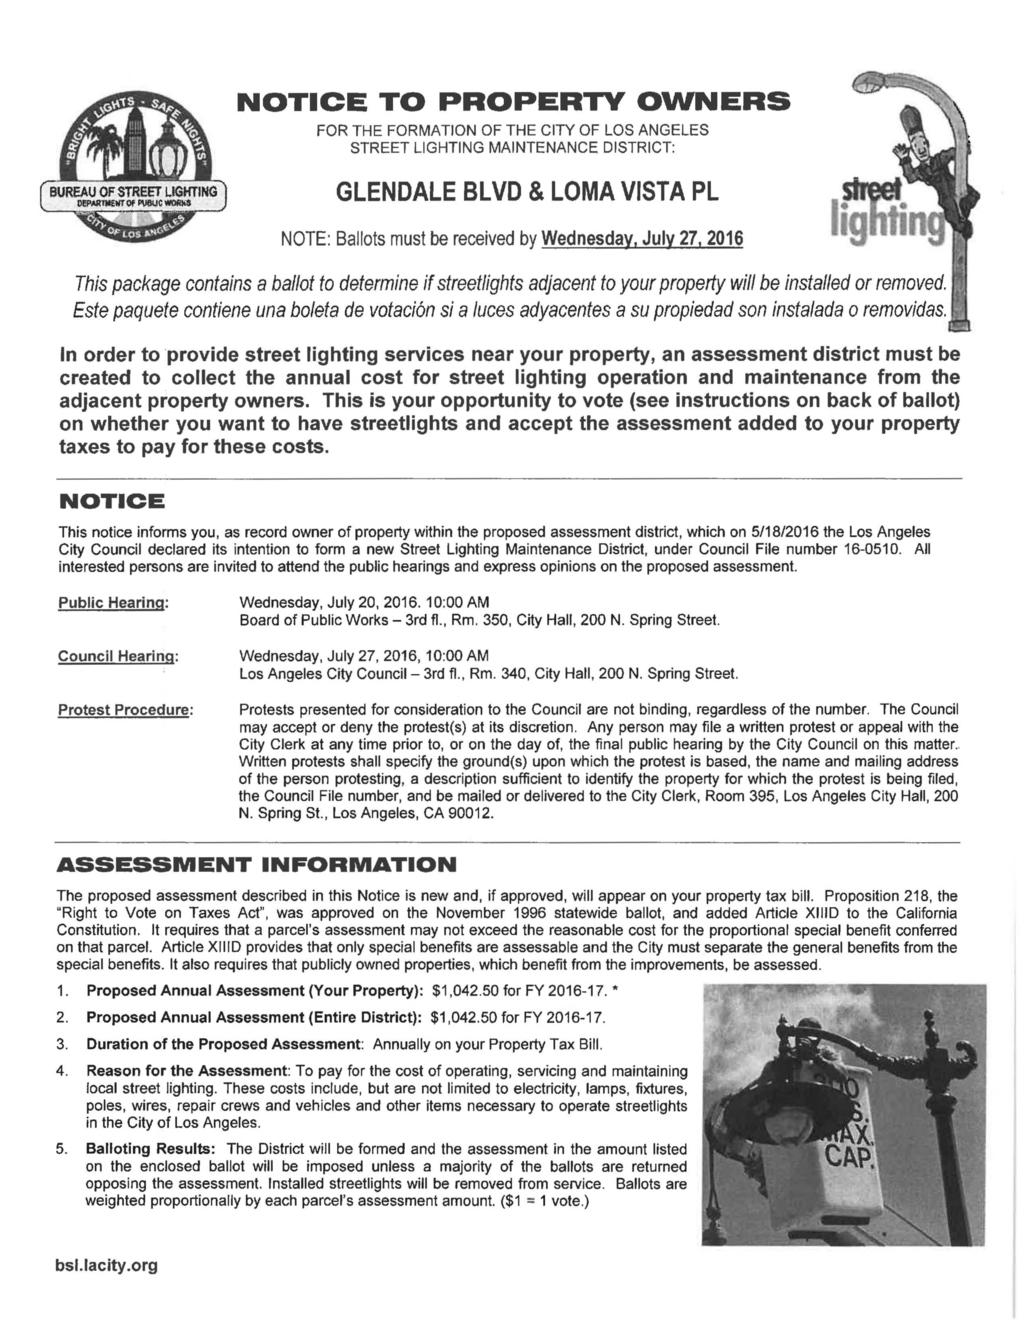 hi III; BUREAU OF STREET LIGHTING OEWIK«r w PVBUC WORKS NOTICE TO PROPERTY OWNERS FOR THE FORMATION OF THE CITY OF LOS ANGELES STREET LIGHTING MAINTENANCE DISTRICT: GLENDALE BLVD & LOMA VISTA PL